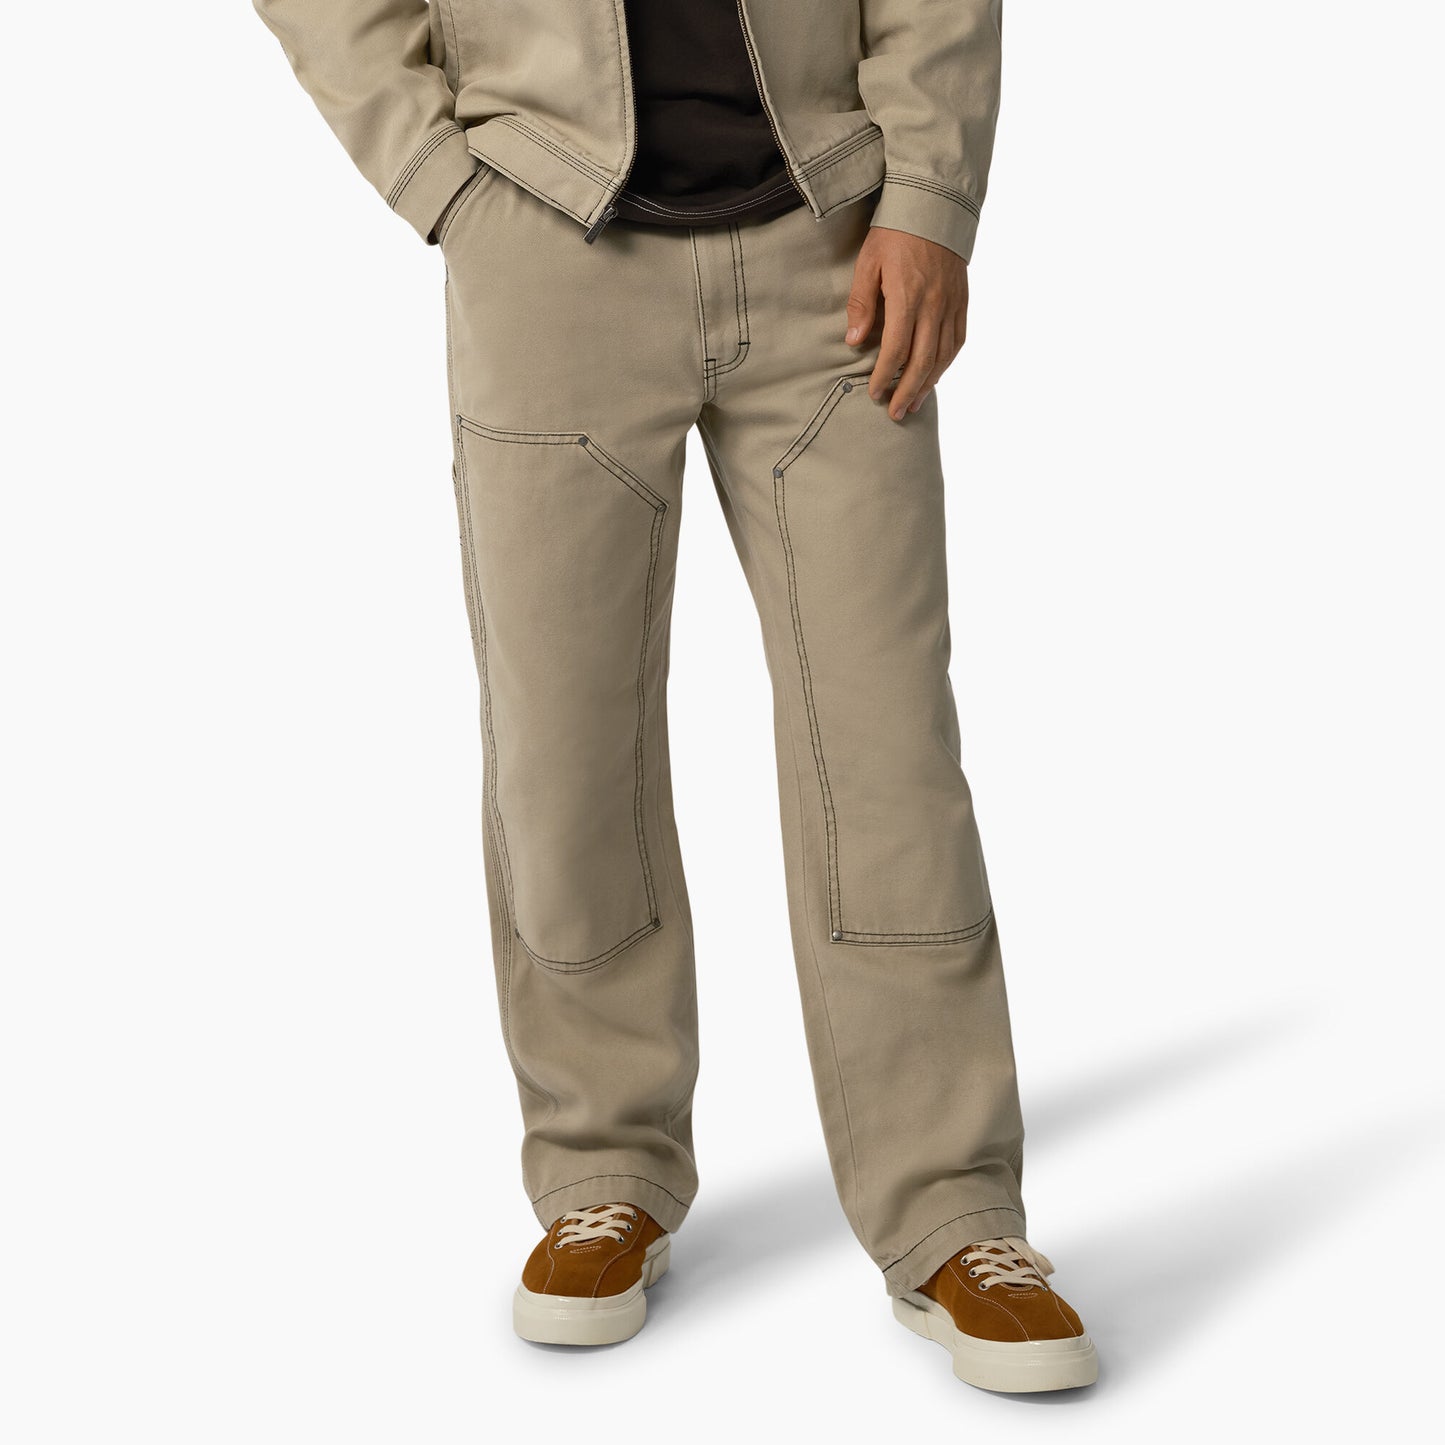 Dickies Contrast Stitch Double Front Pants - Stonewashed Desert Sand/Black